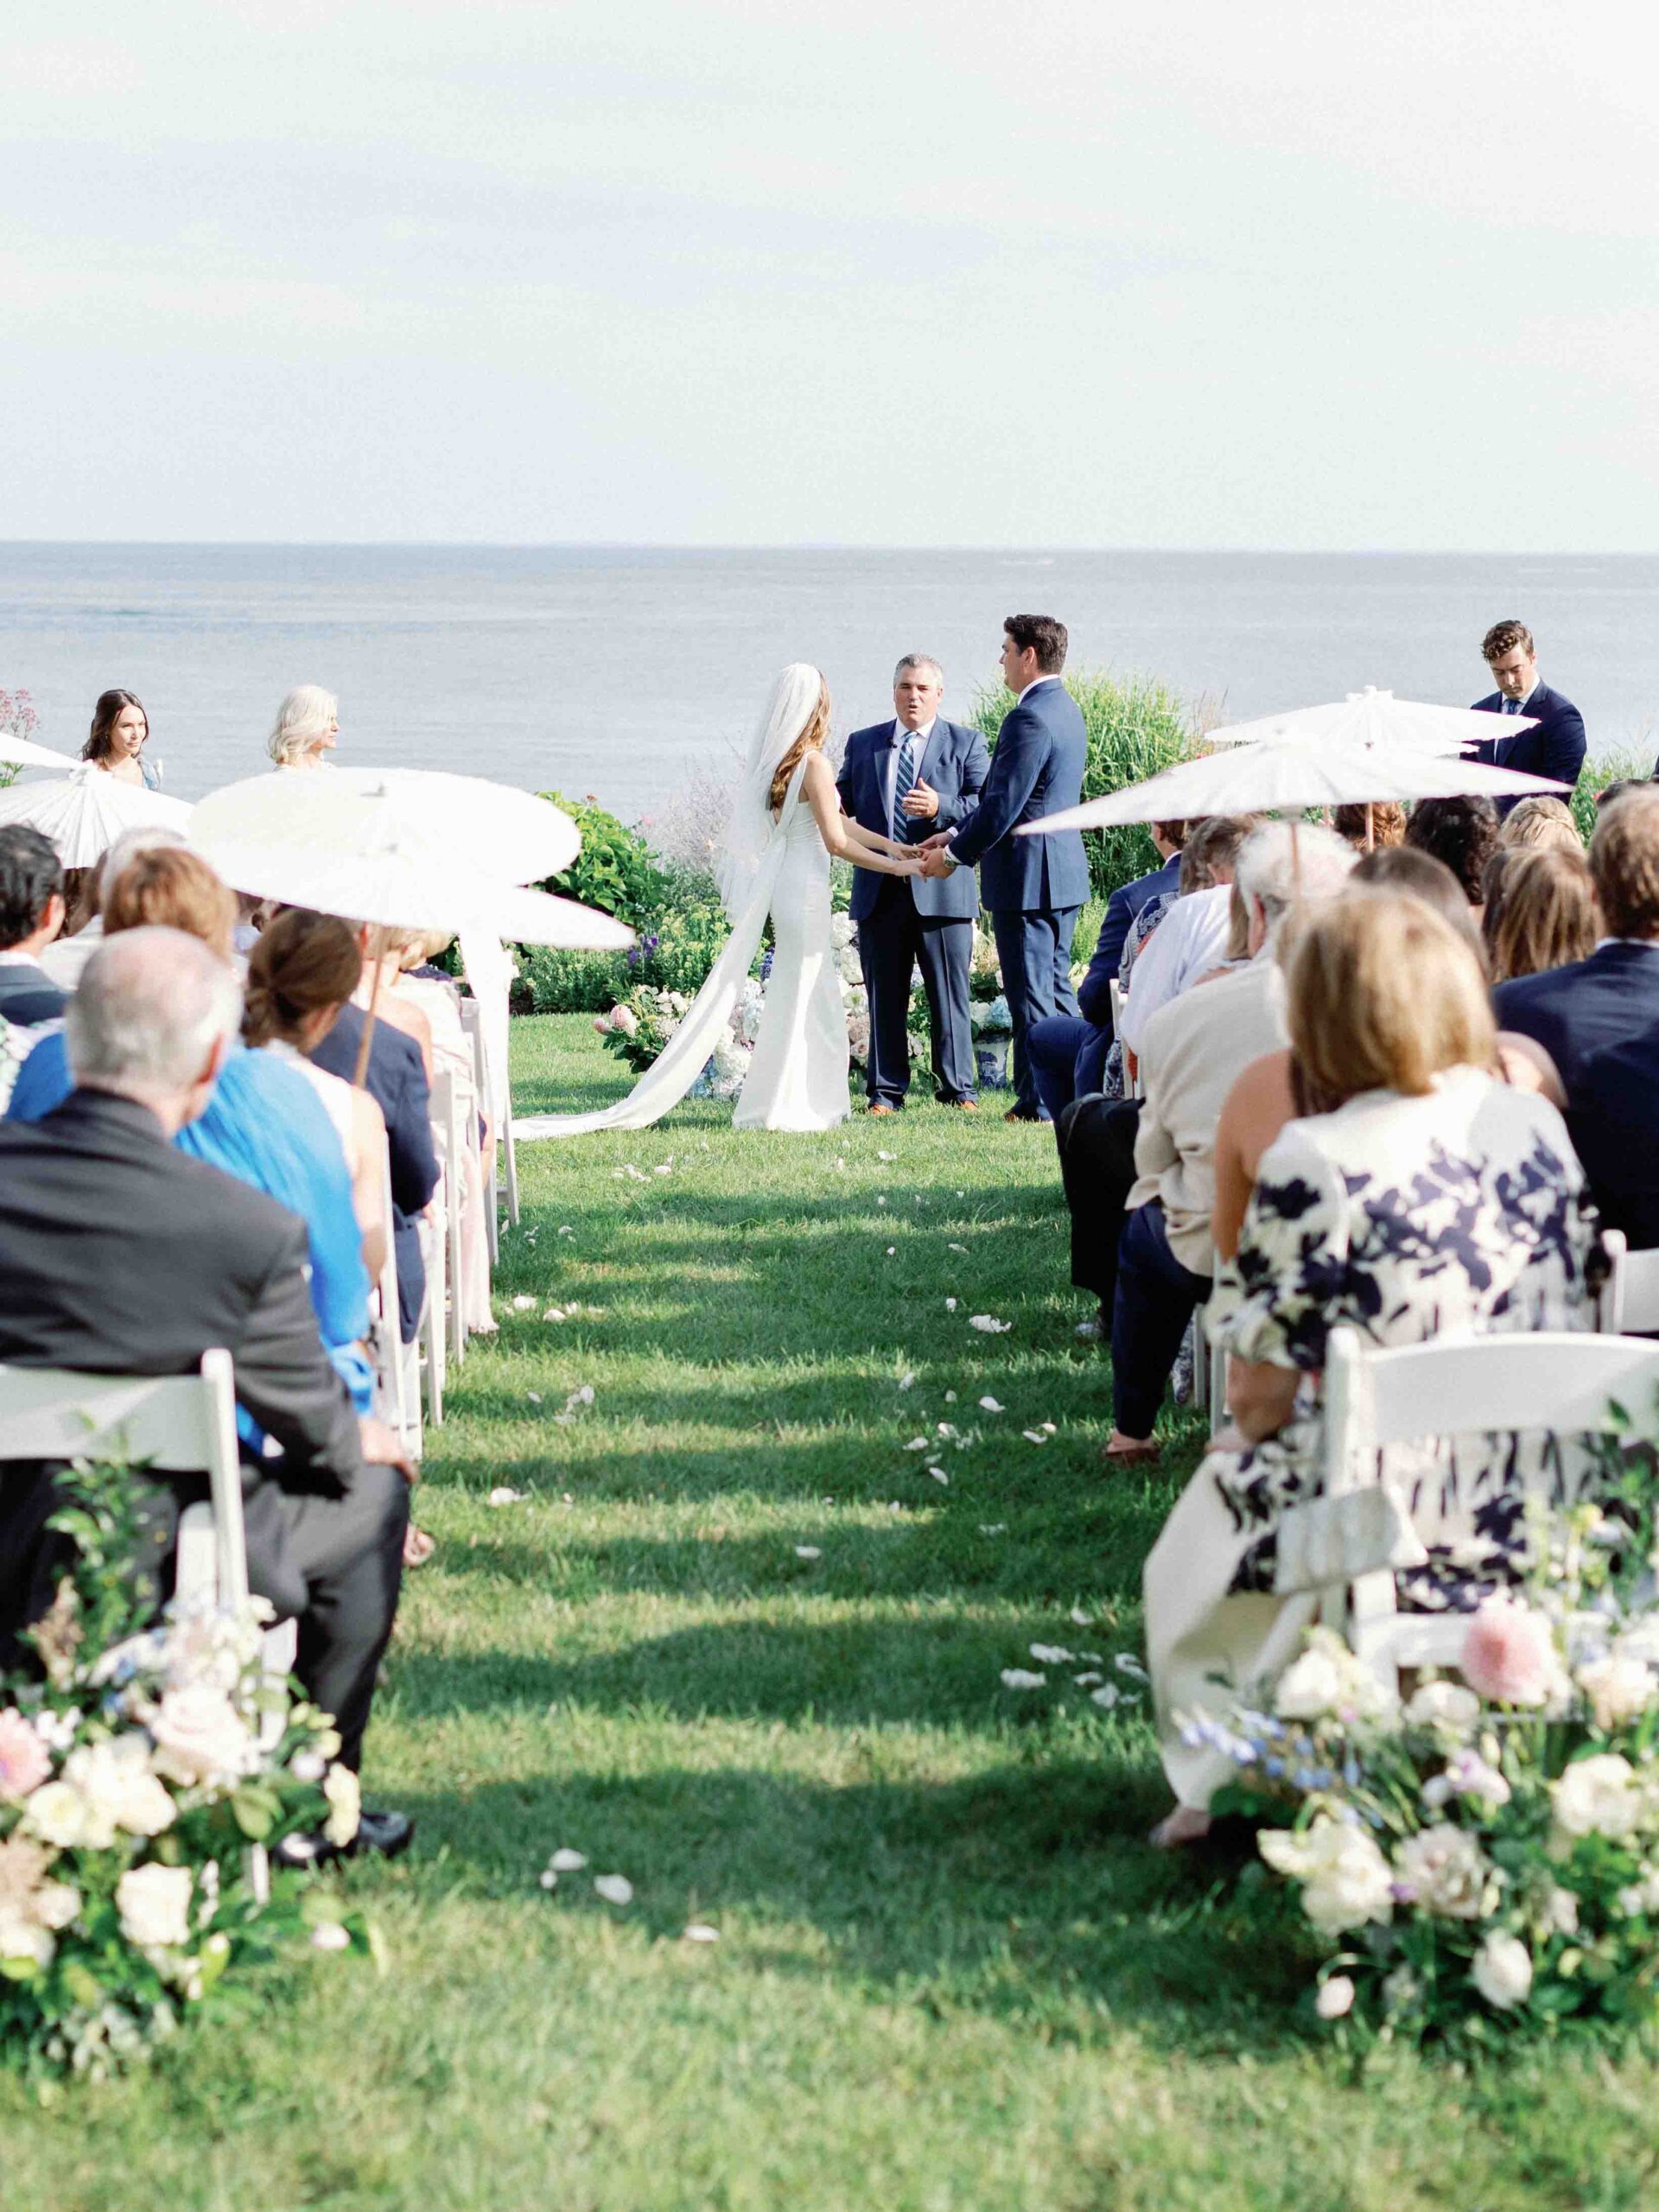 bride and groom holding hands at tje front of the aisle. Long island sound is in the background